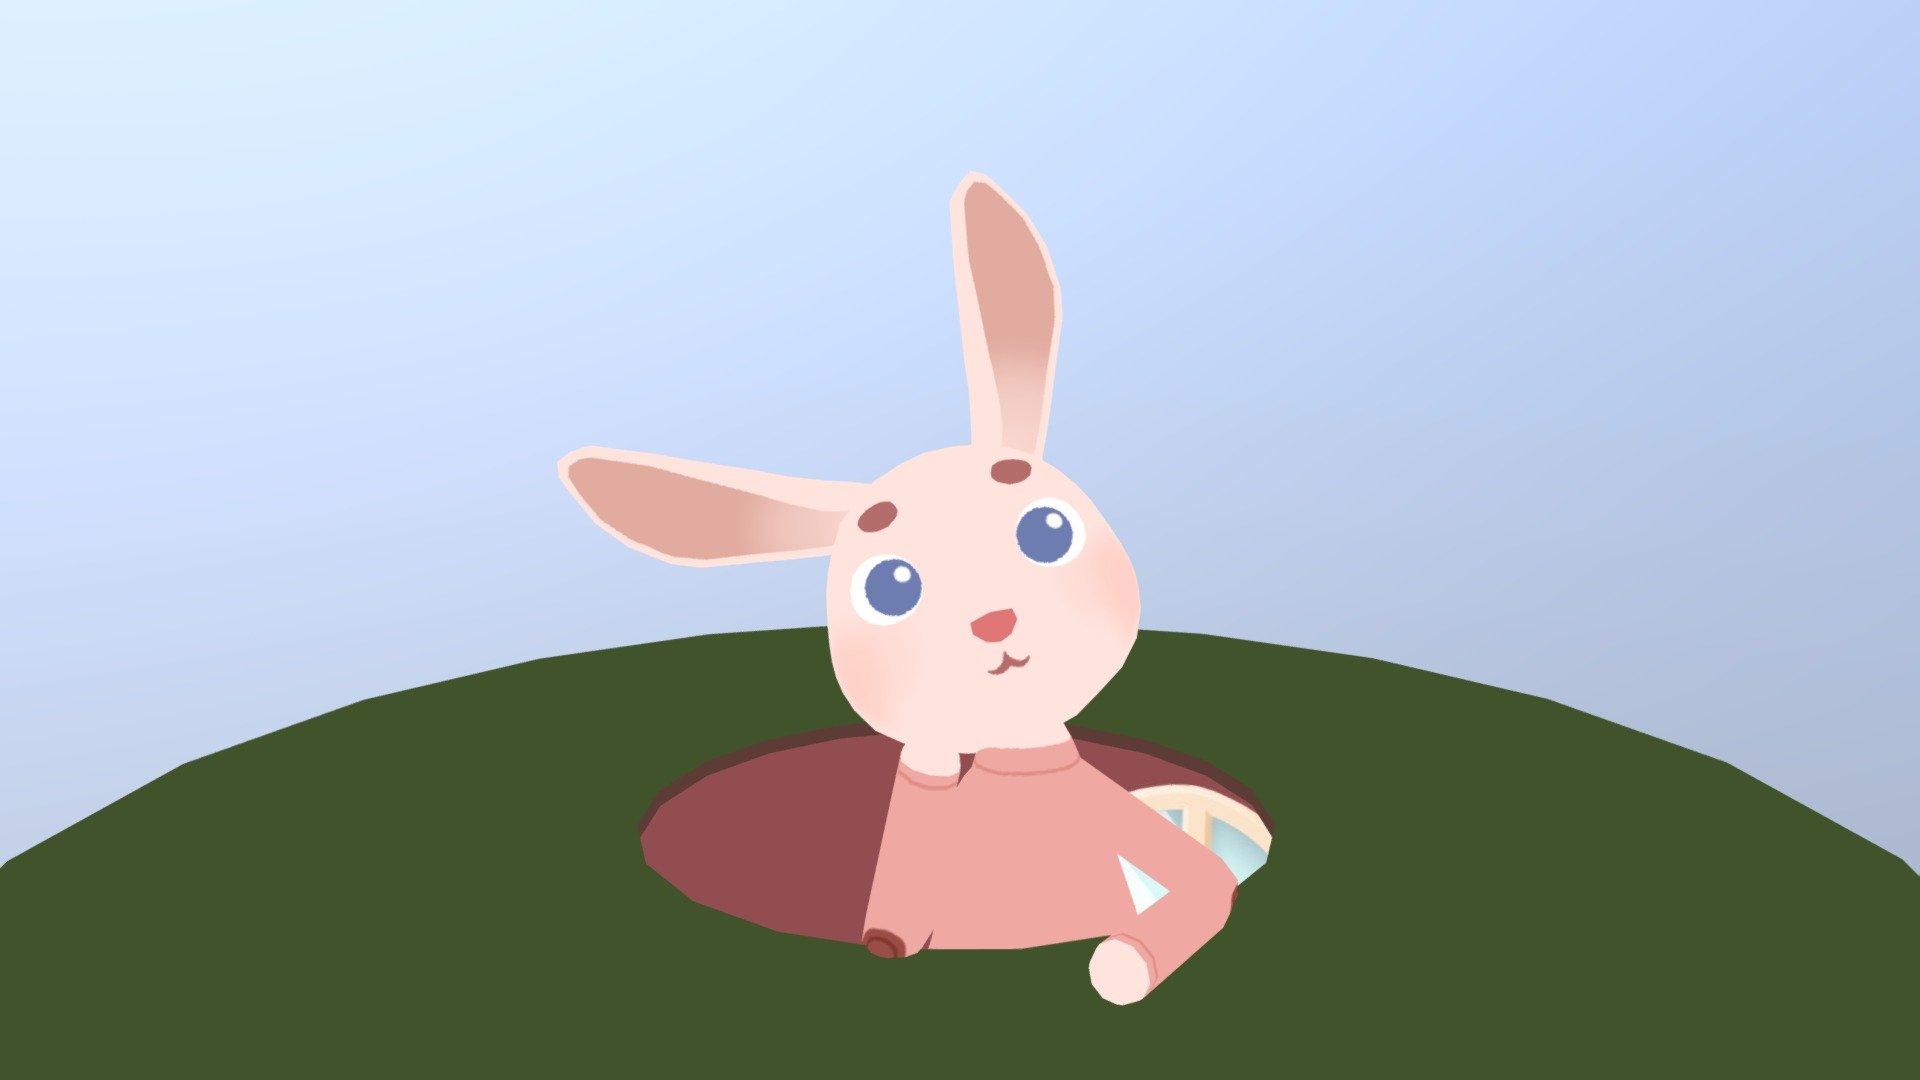 Part of the work I created at Les Éditions Volumiques for a demo of an unannounced AR video game for kids.

I did the model, the textures, the rig and the animations!

To begin the game, place a card shaped like a door on a horizontal surface. Then, the cute rabbit comes out of its hole and interacts with the player! - Volumique - Rabbit - 3D model by Julie Mizreh (@JulieMizreh) 3d model